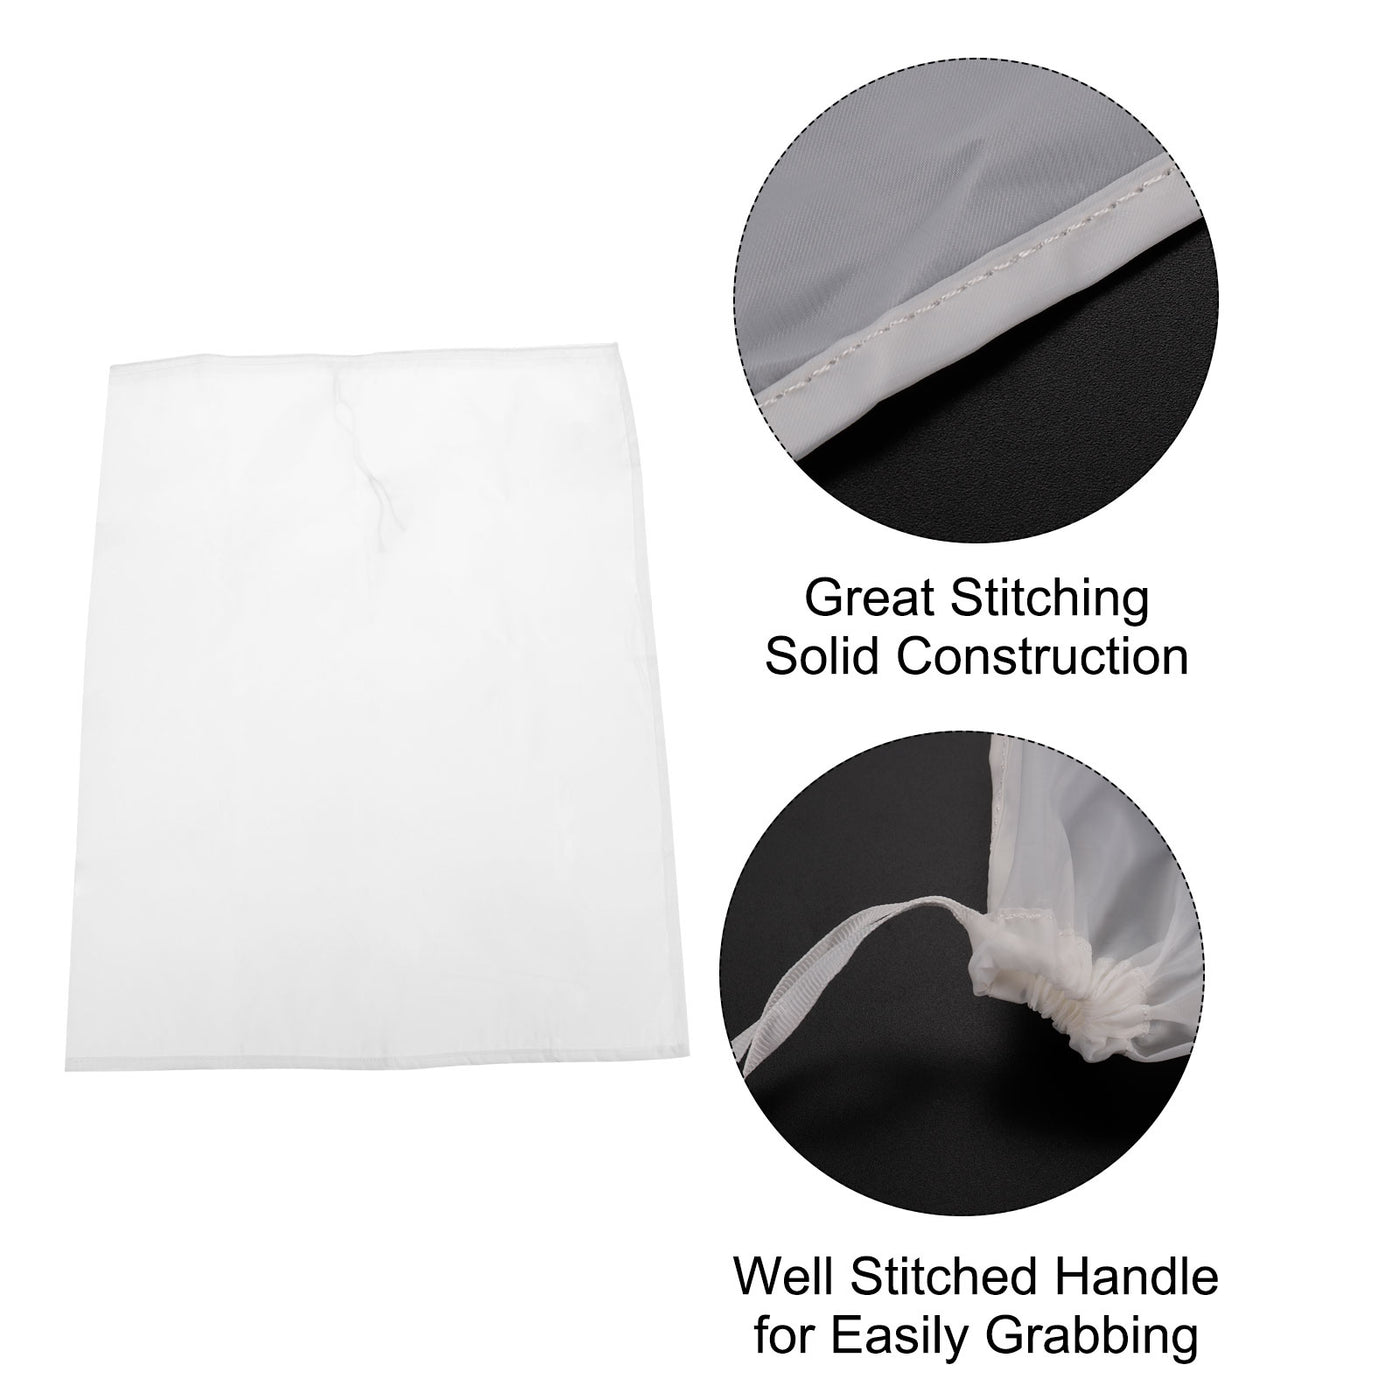 uxcell Uxcell Paint Filter Bag 300 Mesh (23.6"x17.7") Nylon Strainer for Filtering Paint